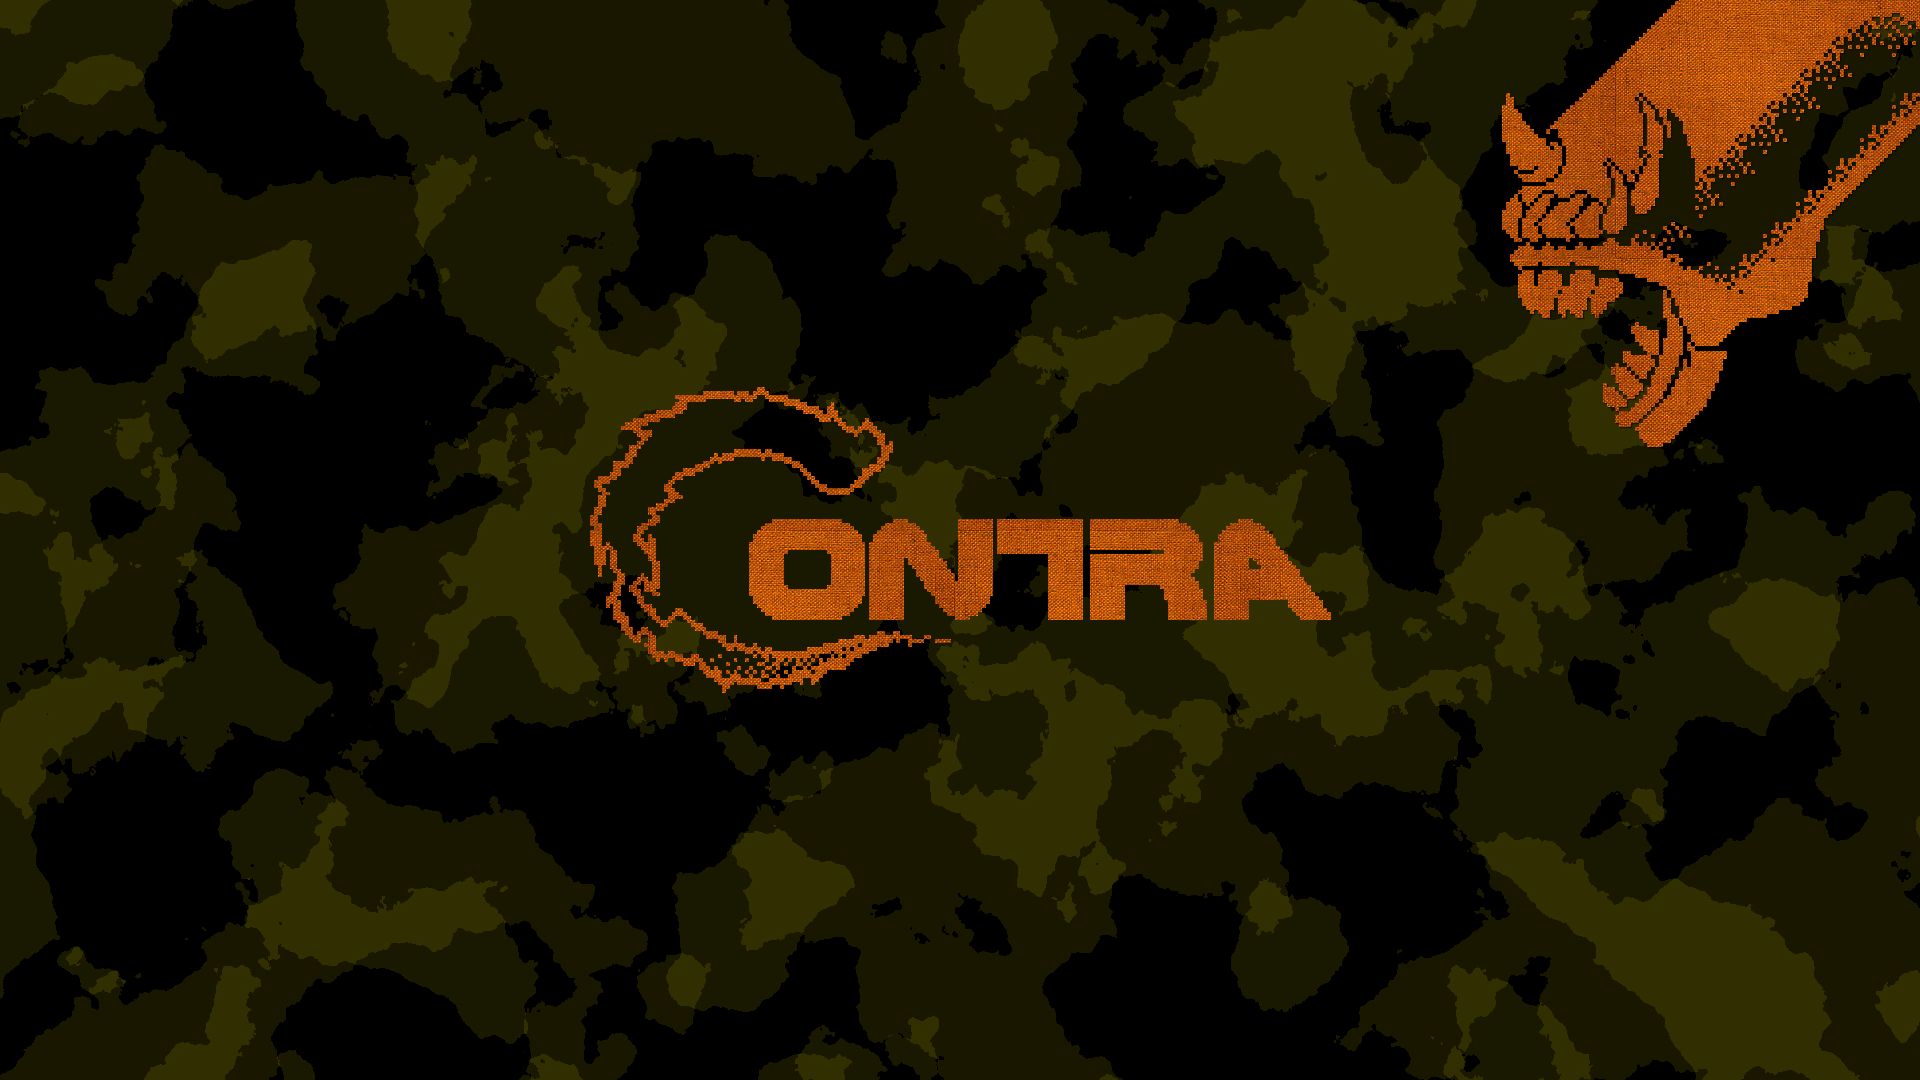 video game, contra